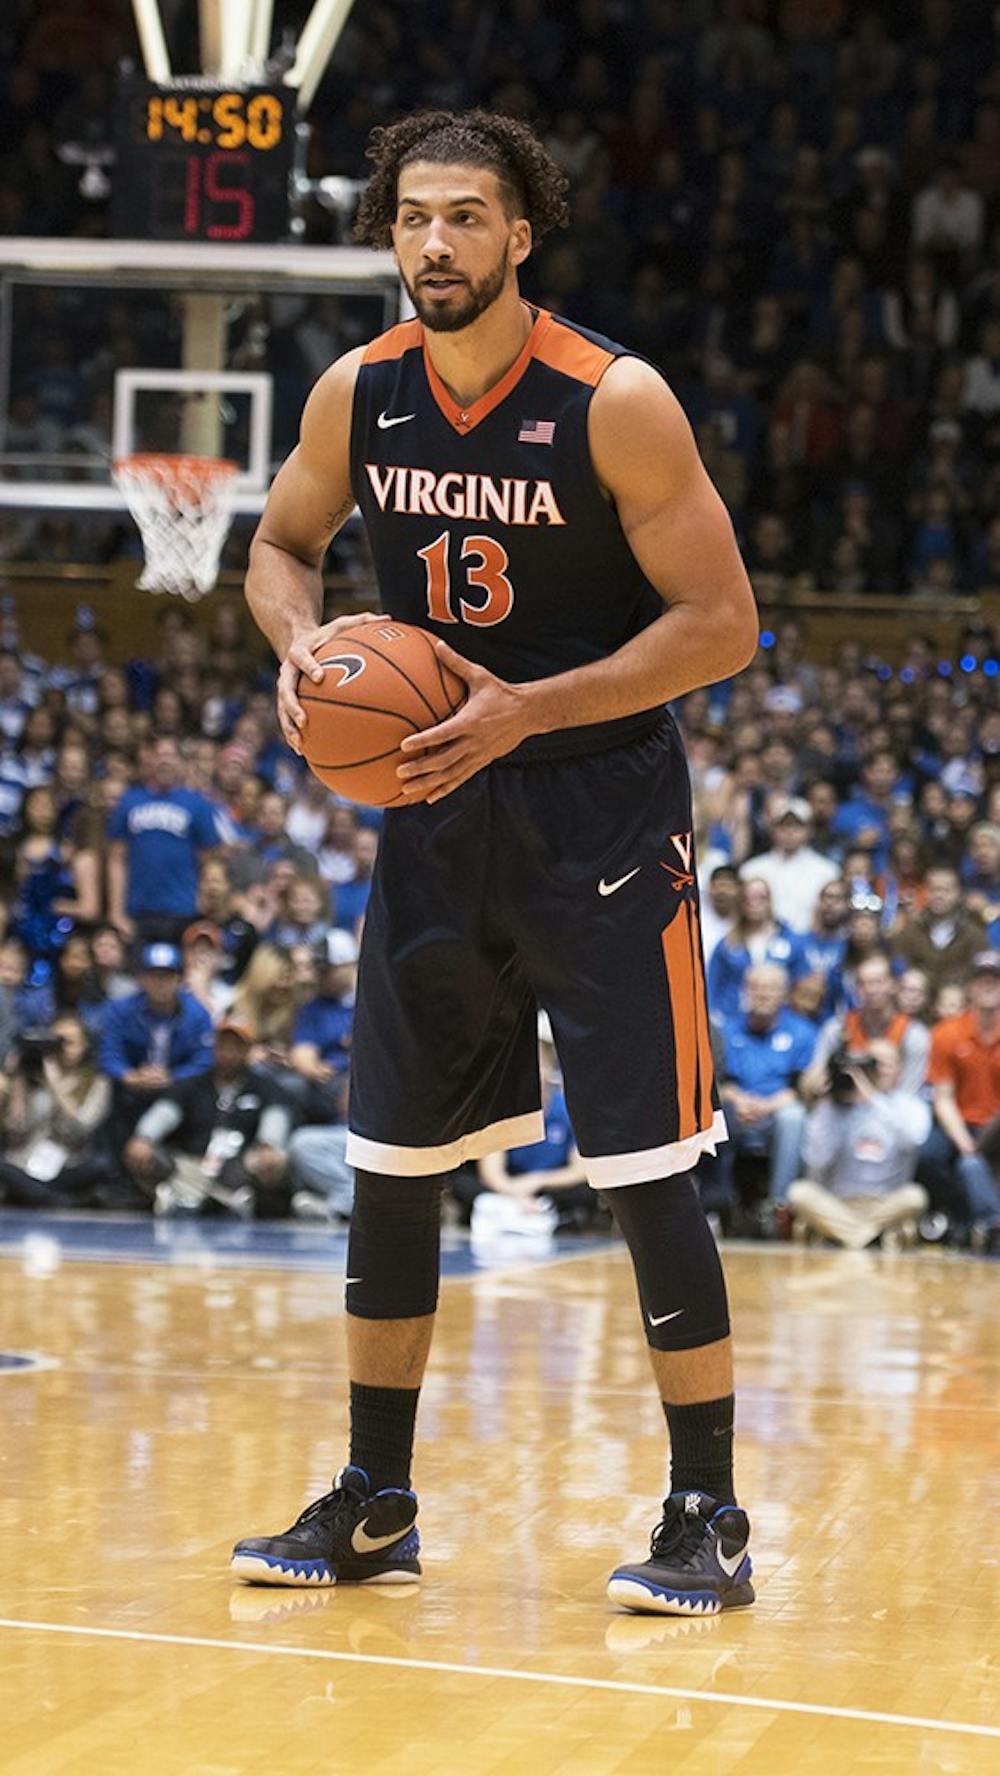 <p>Senior forward Anthony Gill's high motor returned on GameDay. He scored 15 points and snatched a game-high nine rebounds in the 79-74 win over North Carolina. Prior to Saturday, Gill had averaged just 8 points and 6.33 rebounds over the Cavaliers' 1-2 stretch.&nbsp; </p>